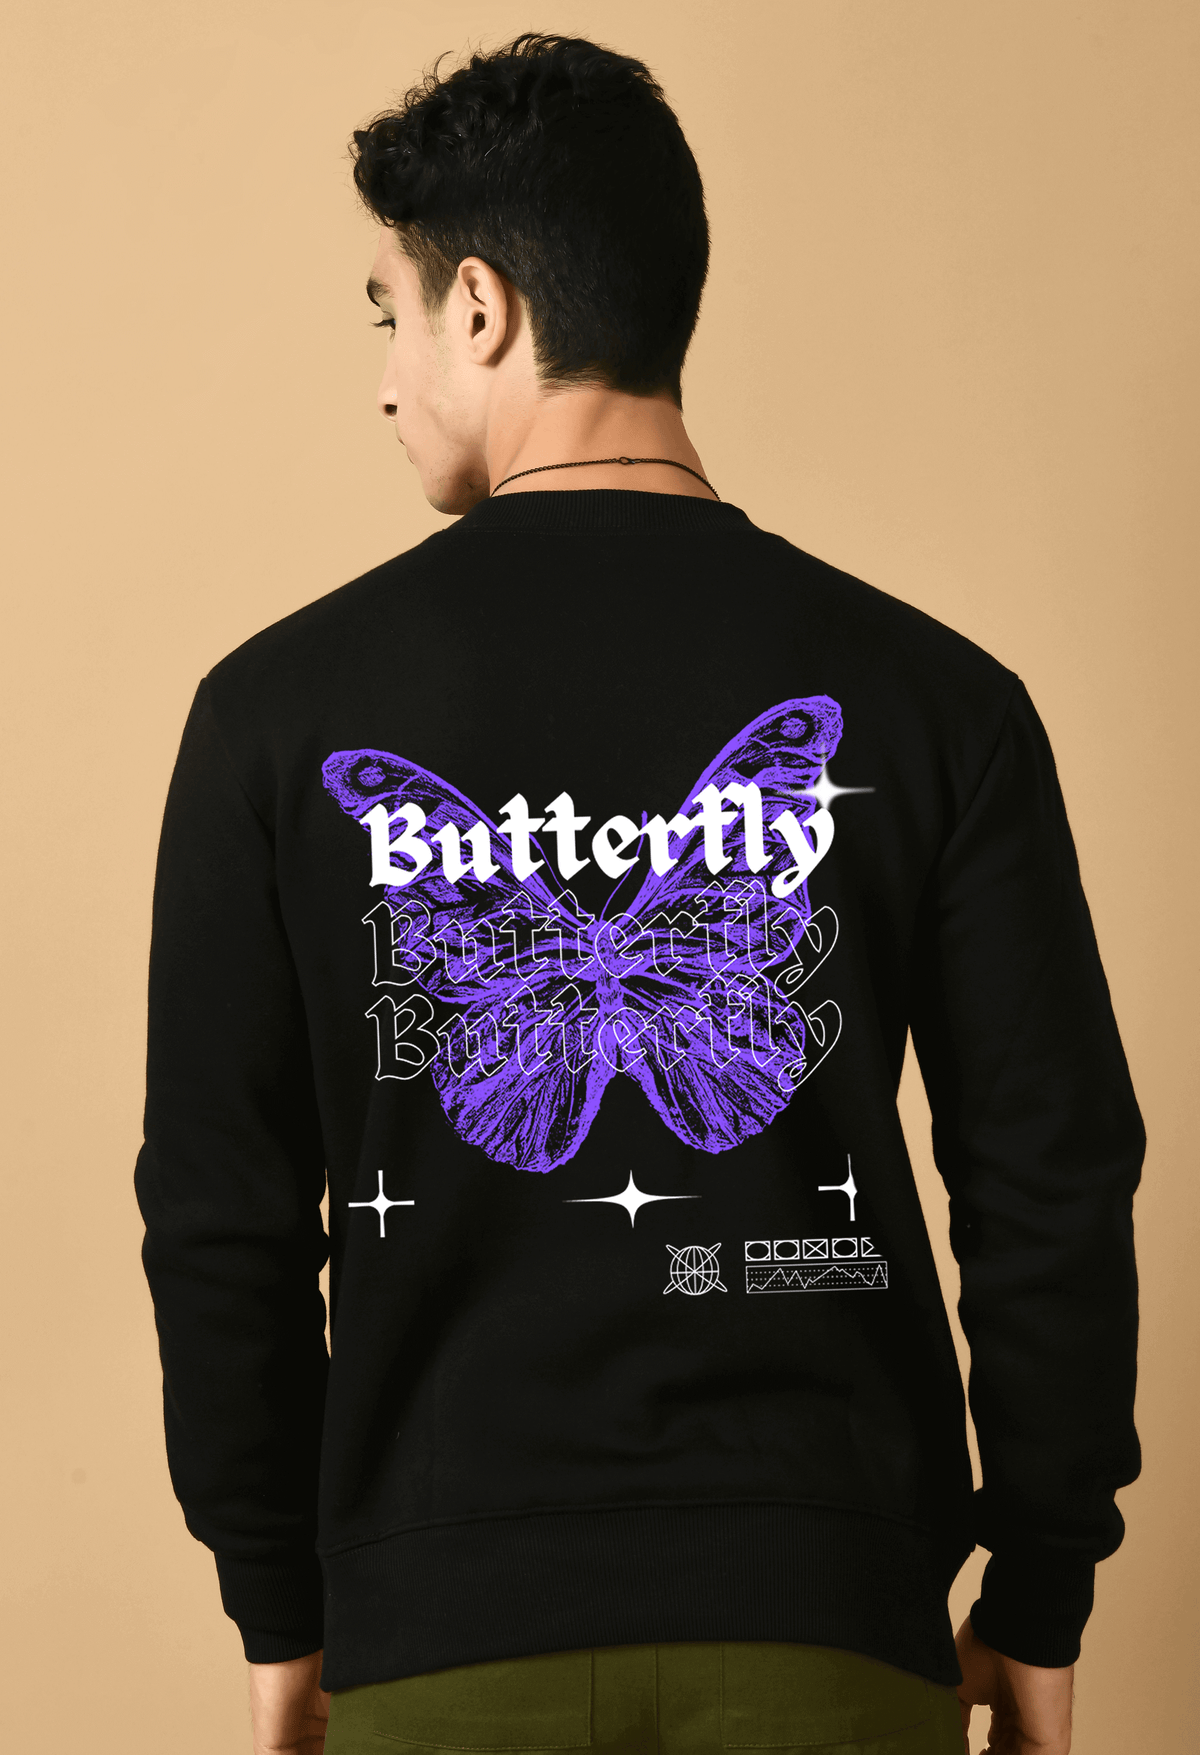 Butterfly printed black color men's sweatshirt by offmint